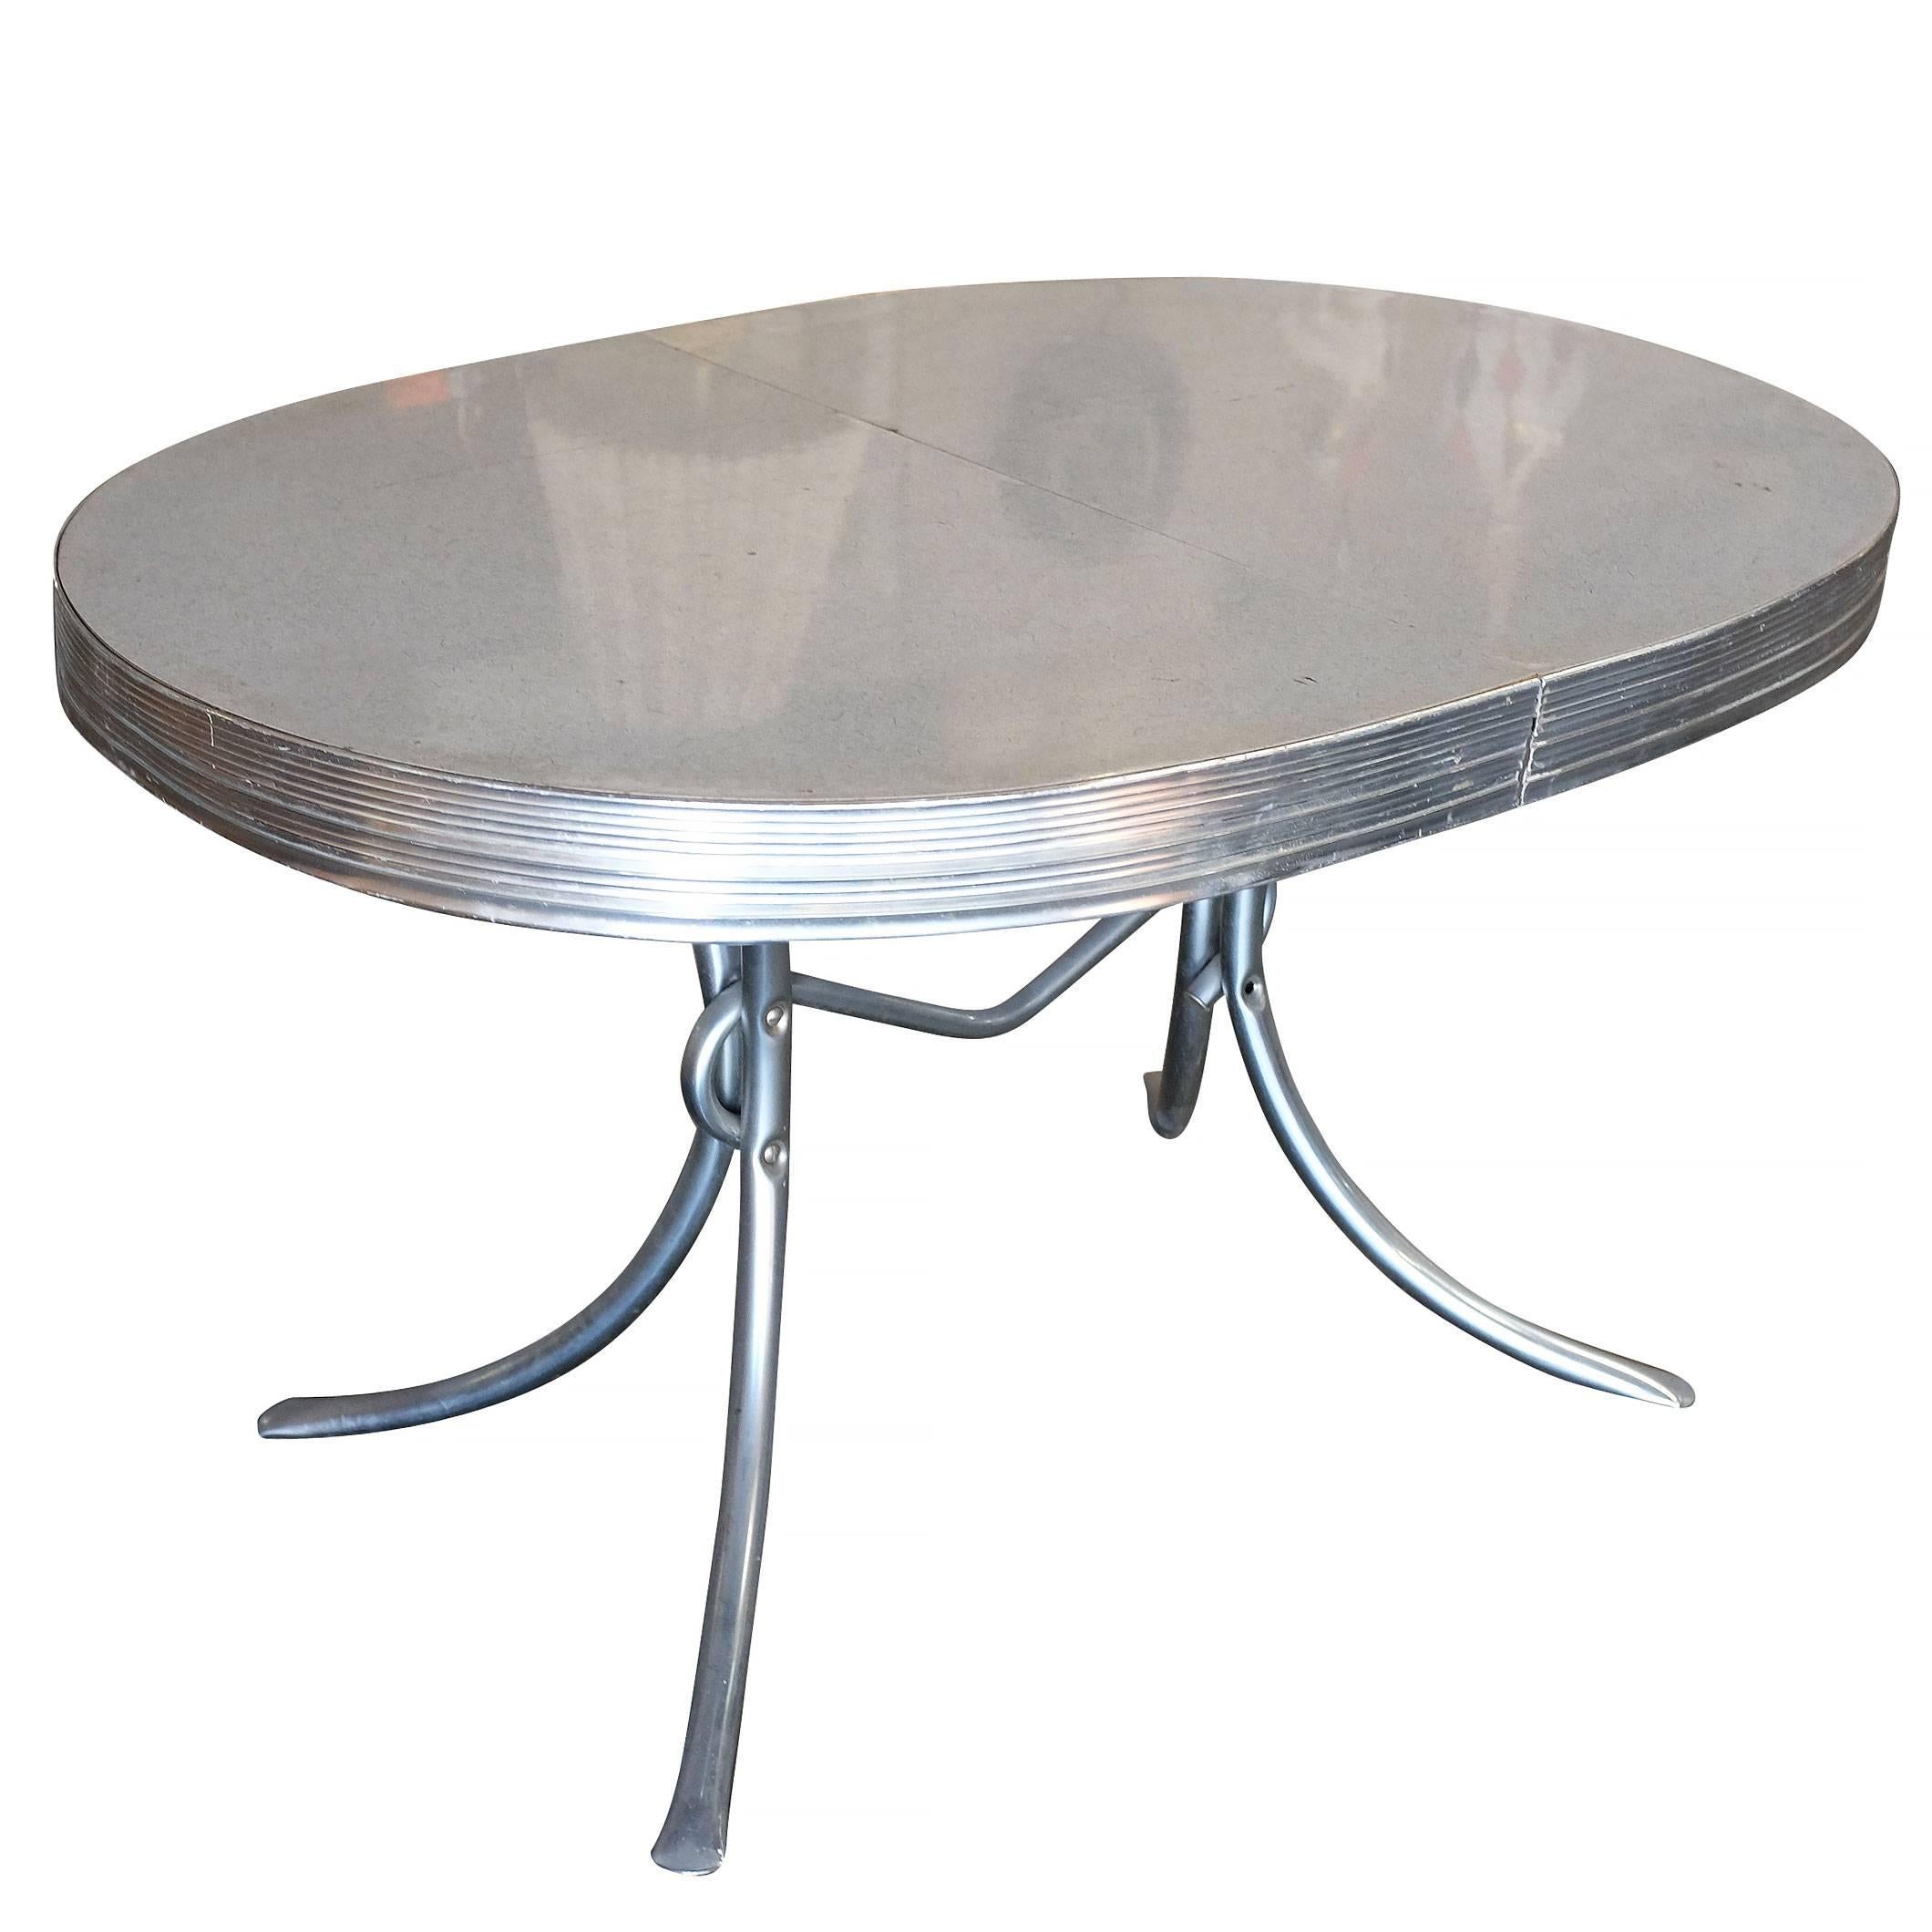 value of 1950s chrome and formica table